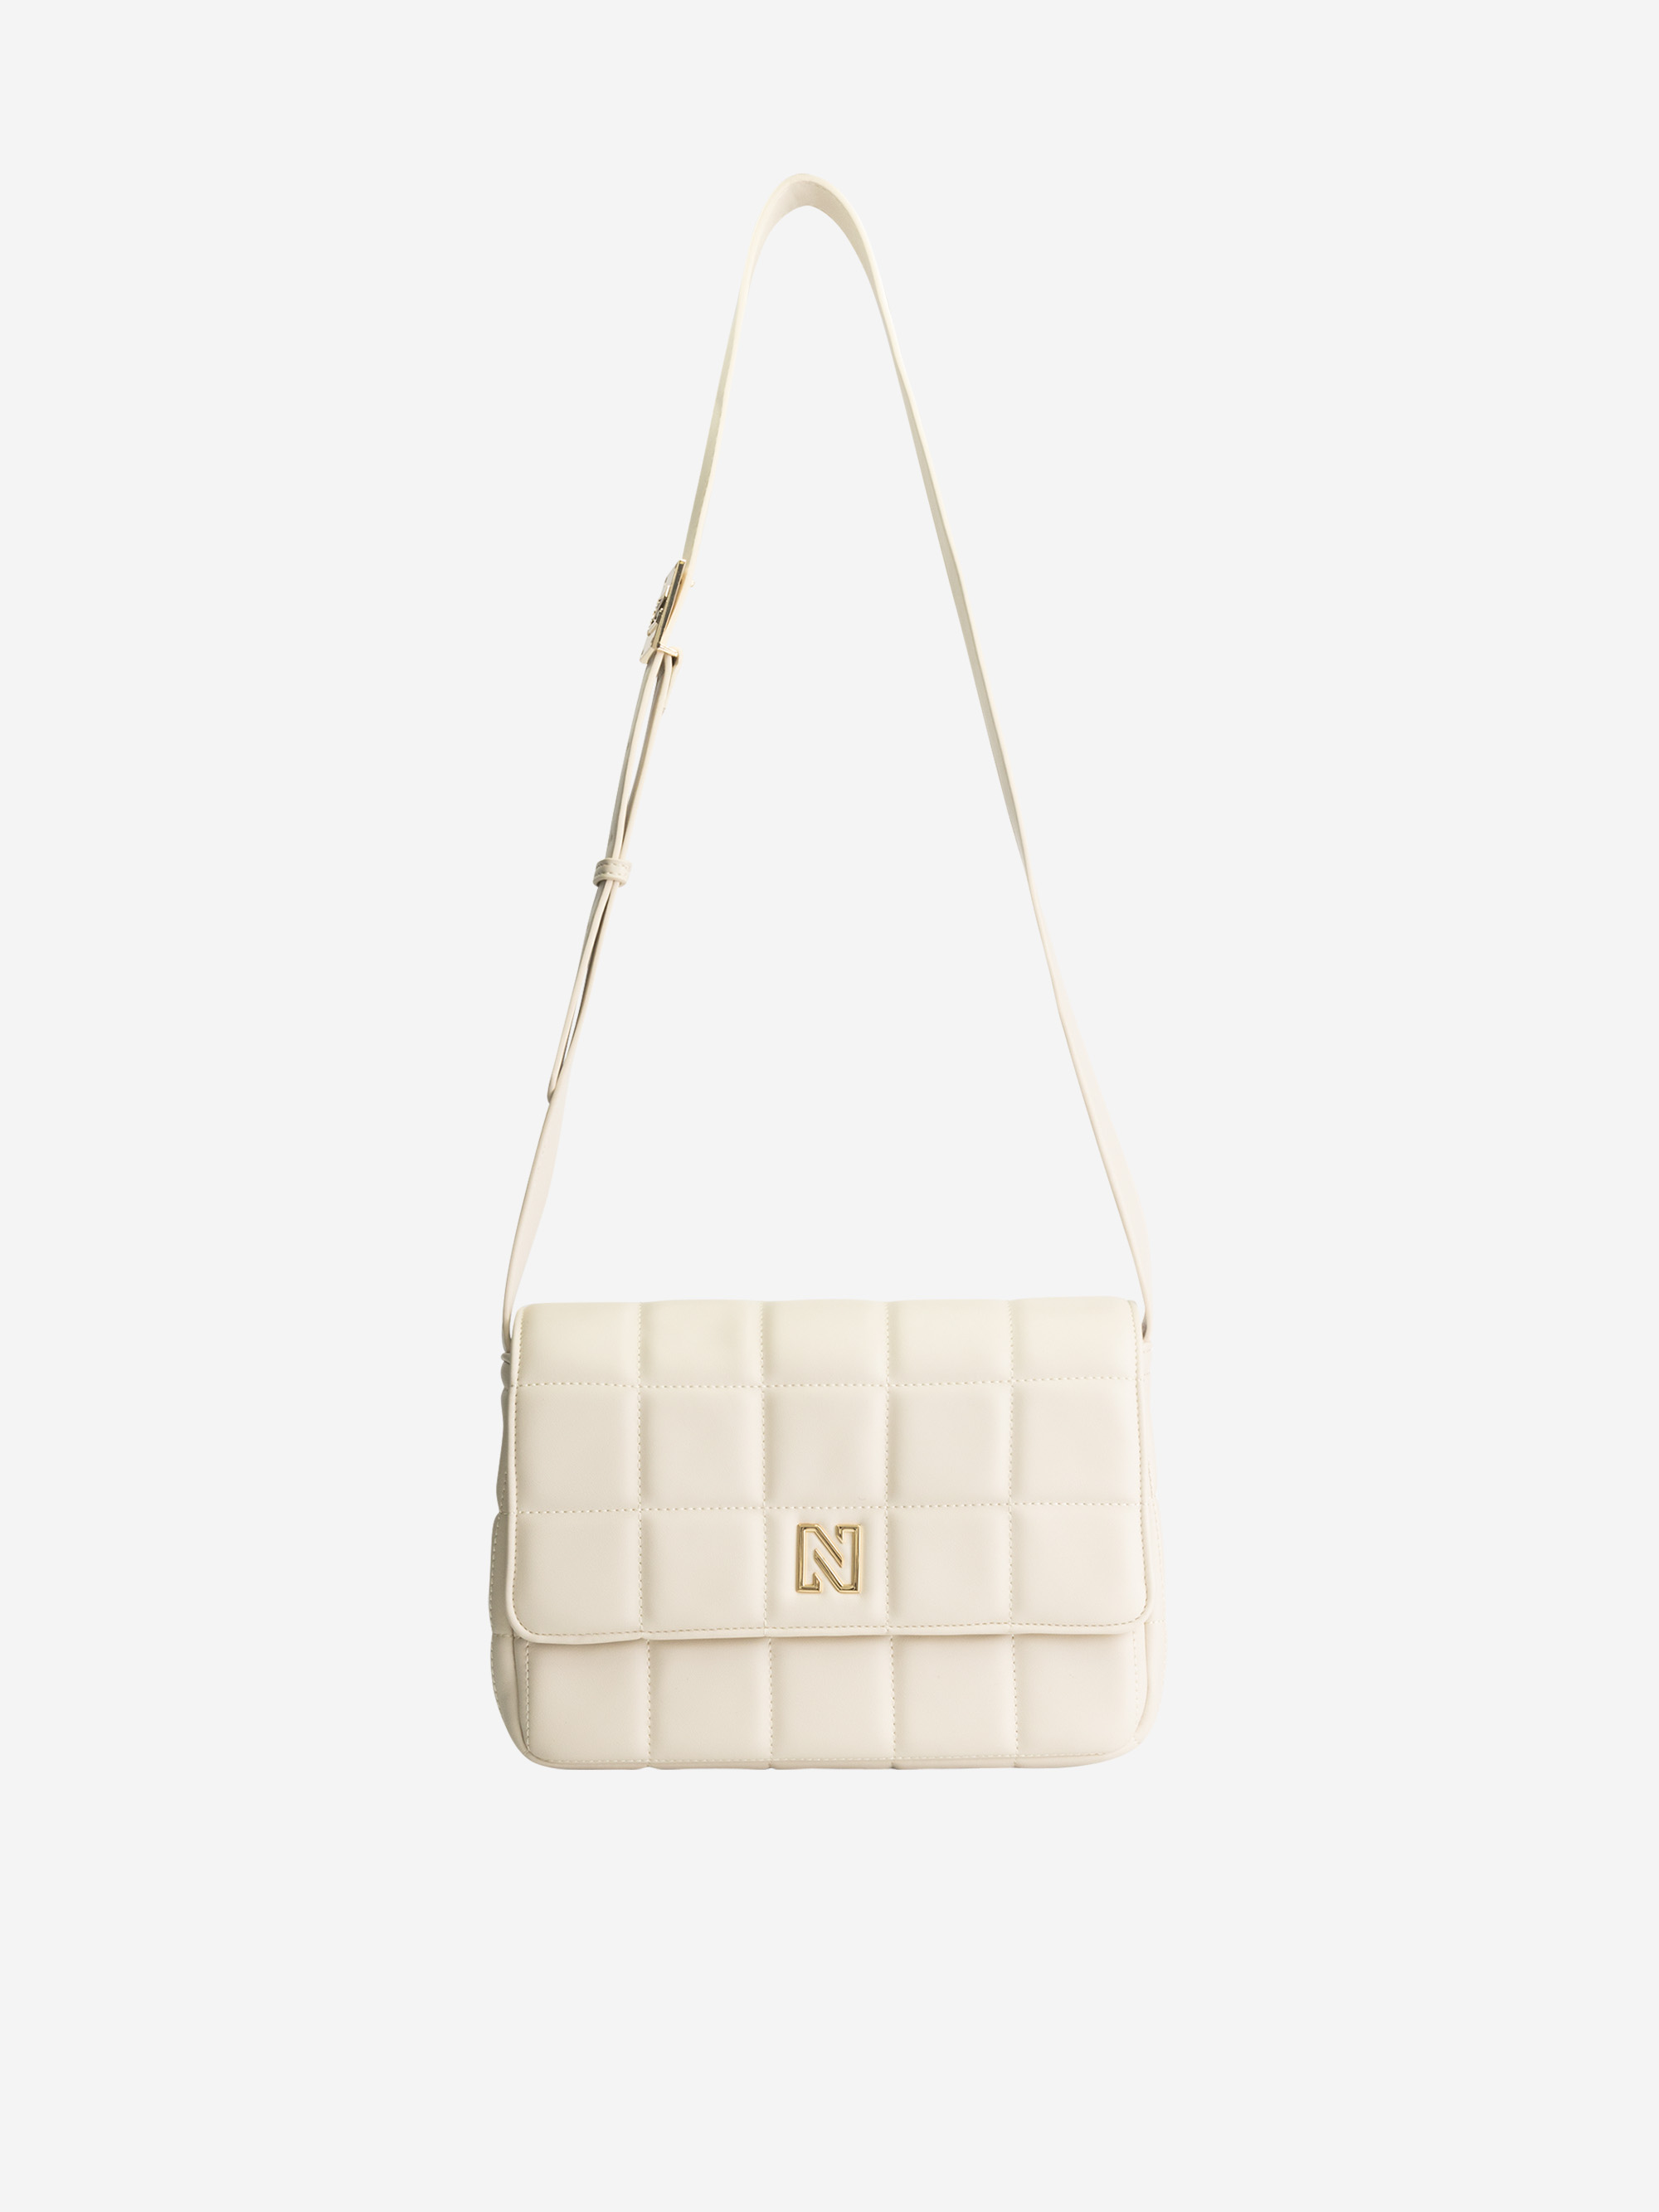 Quilted Shoulderbag with N-logo